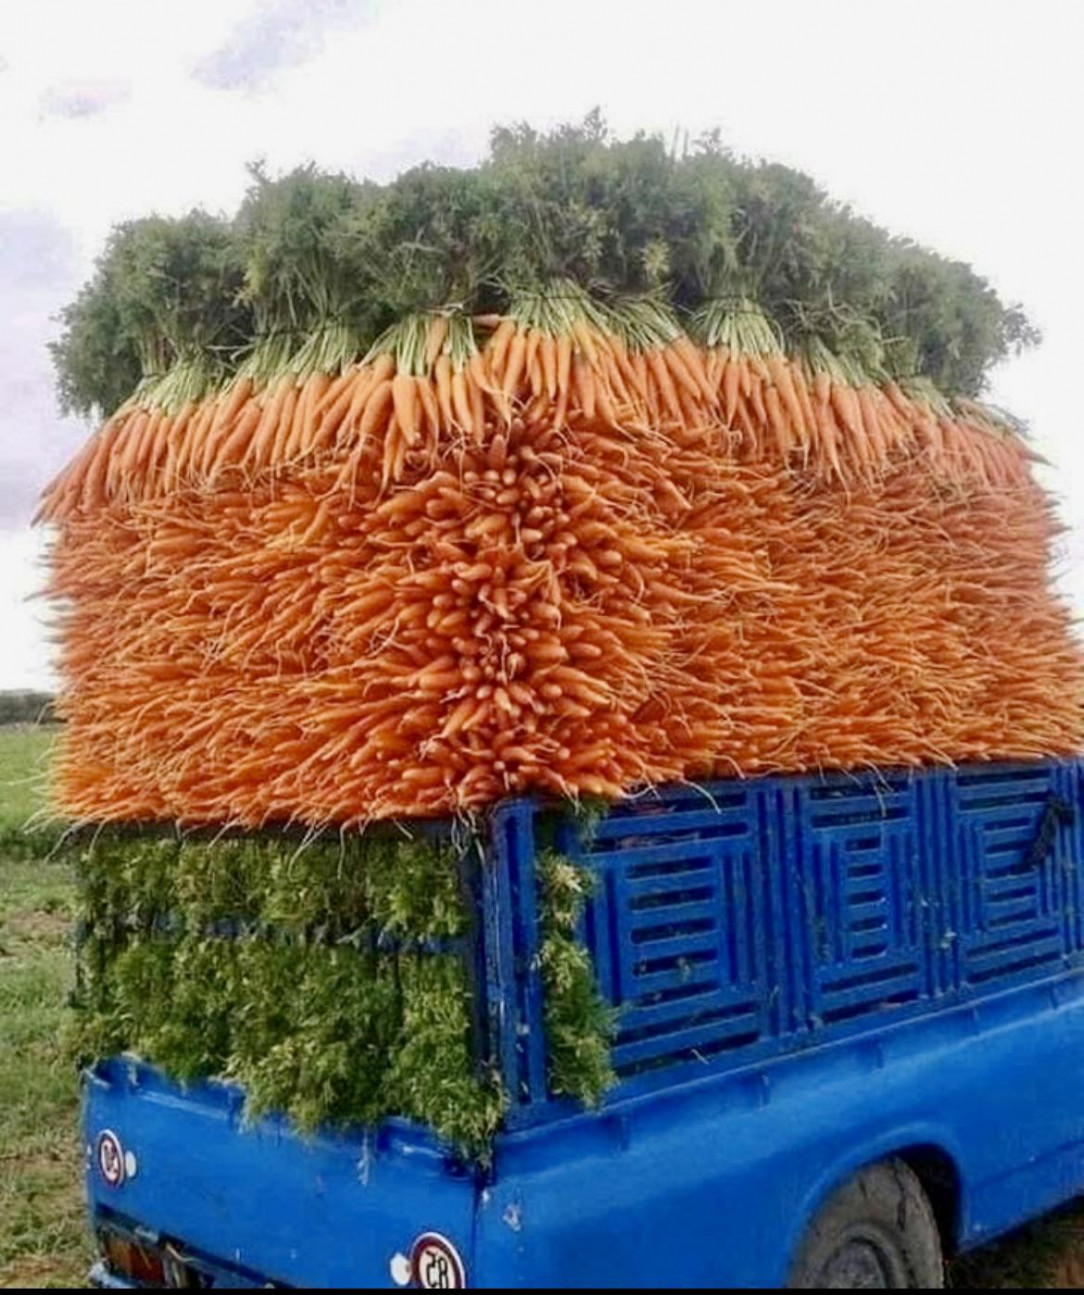 A truck filled with carrots